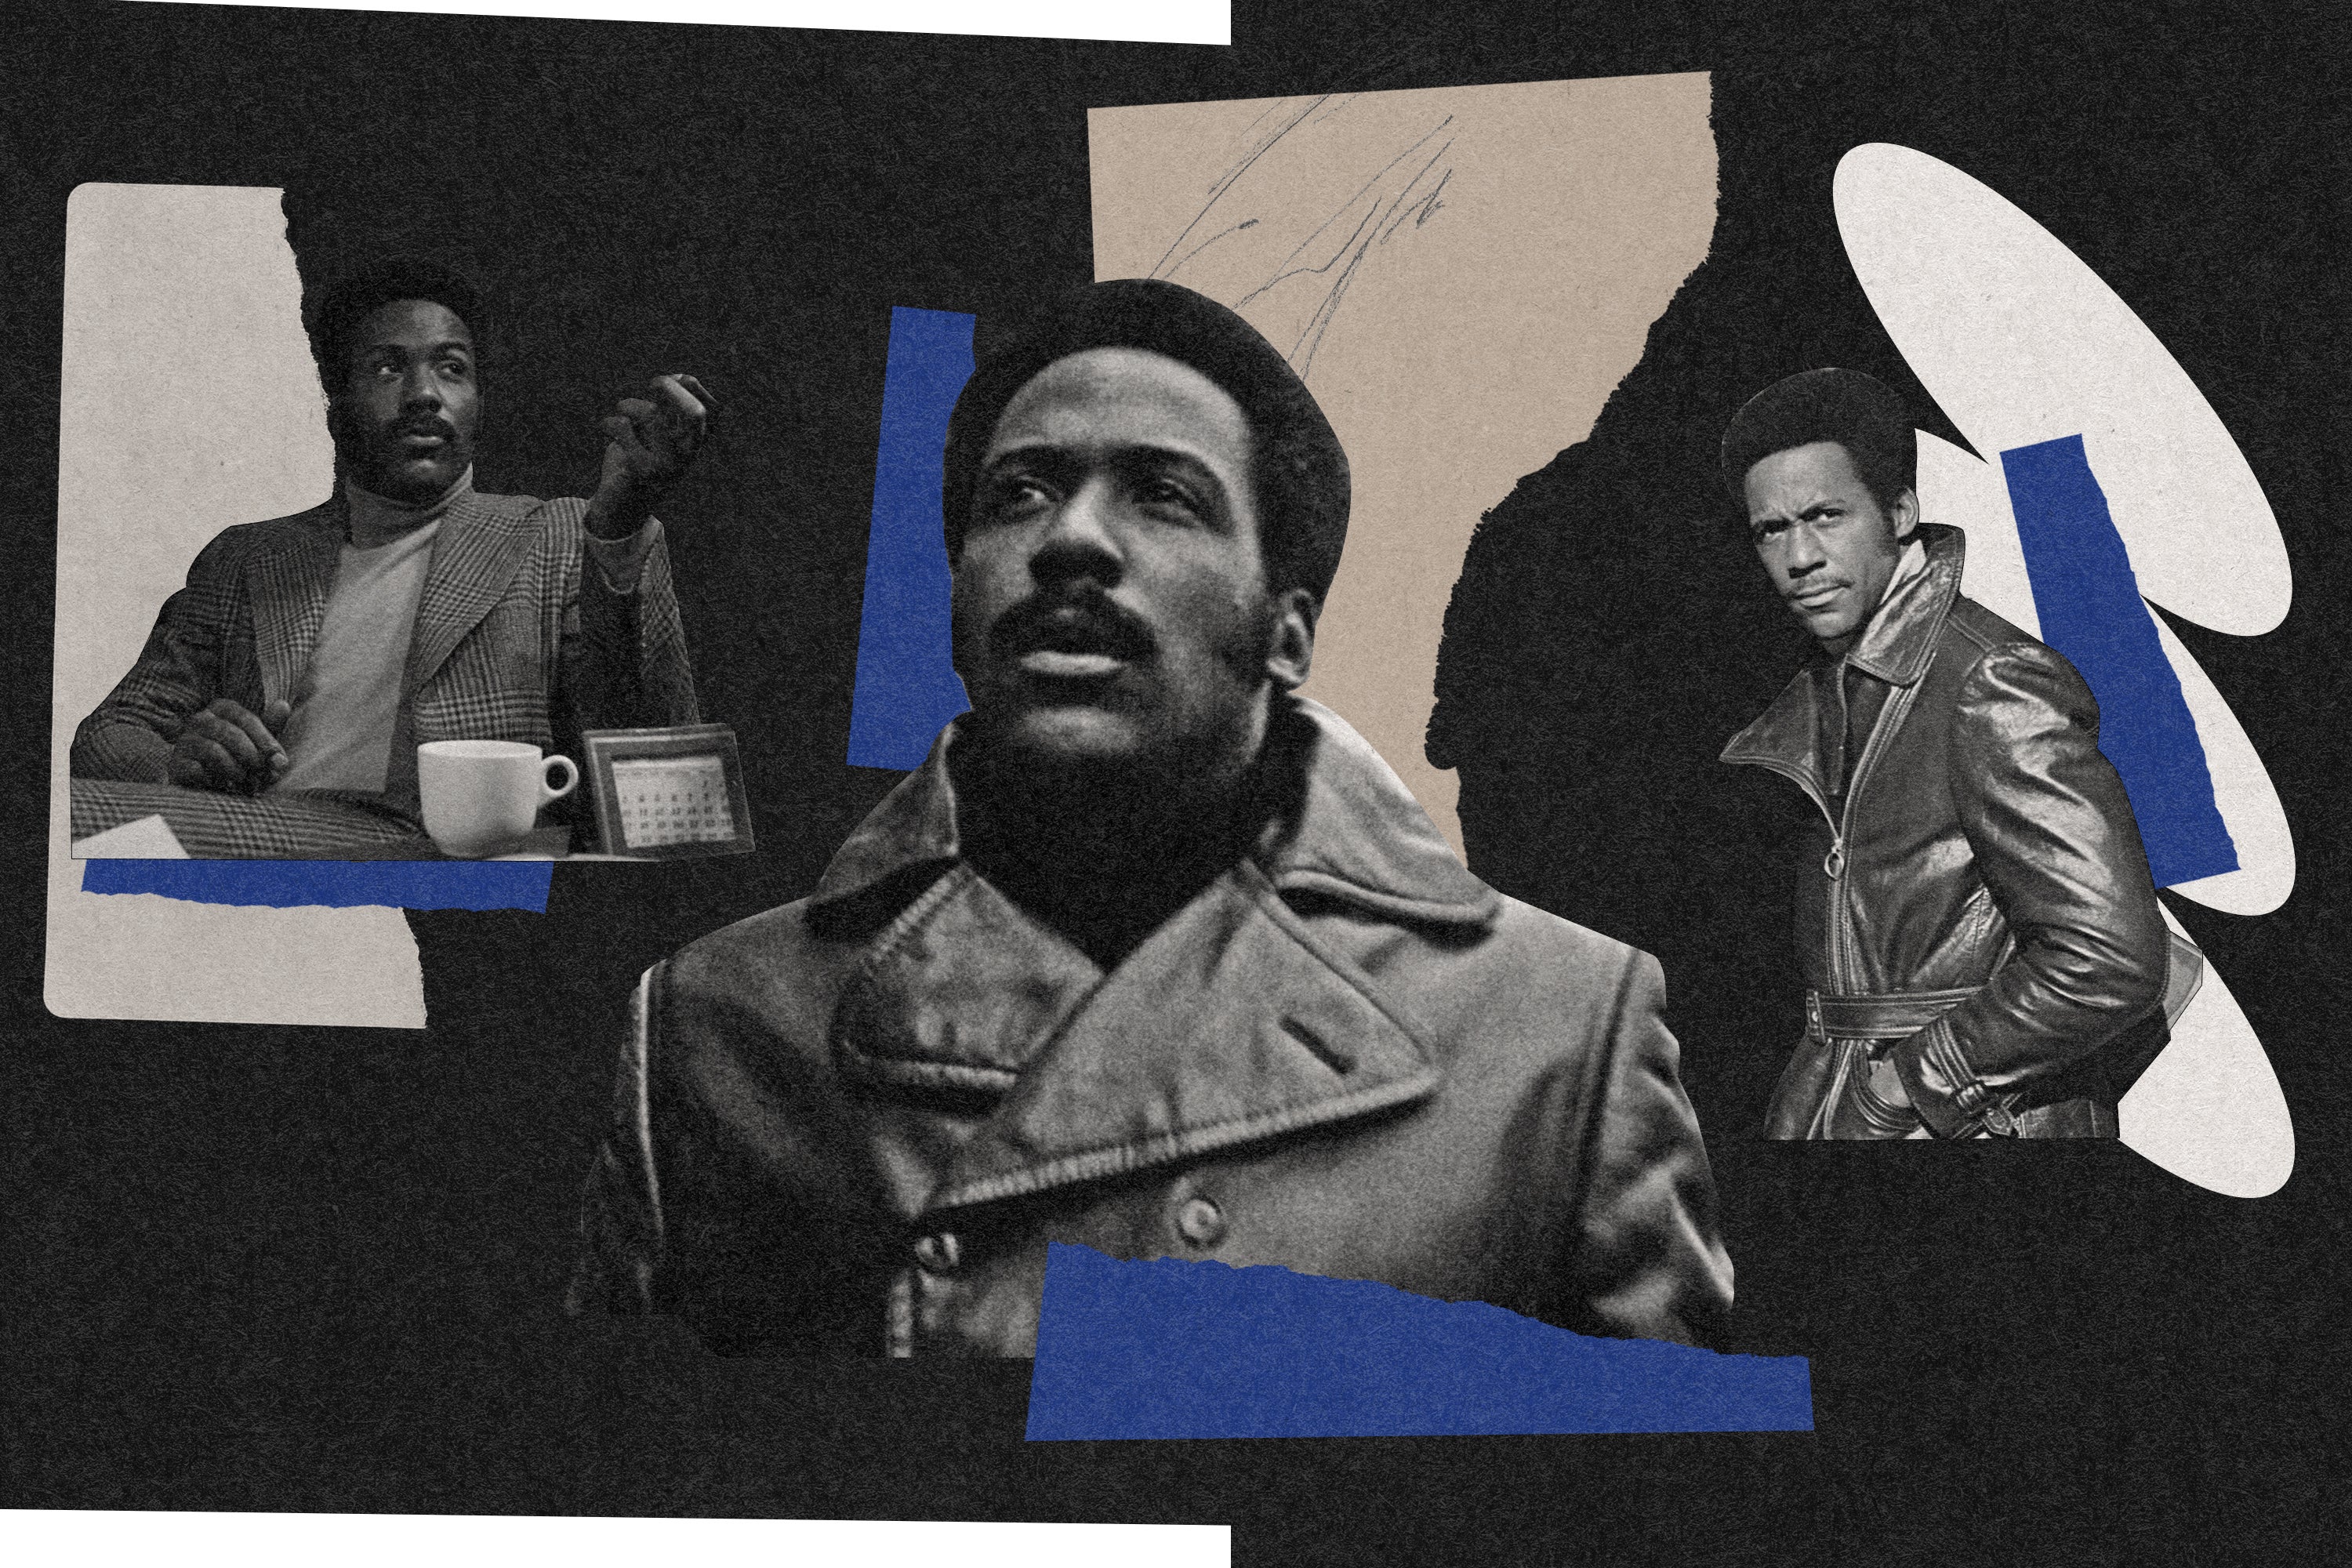 Collage of film stills from the movie Shaft.